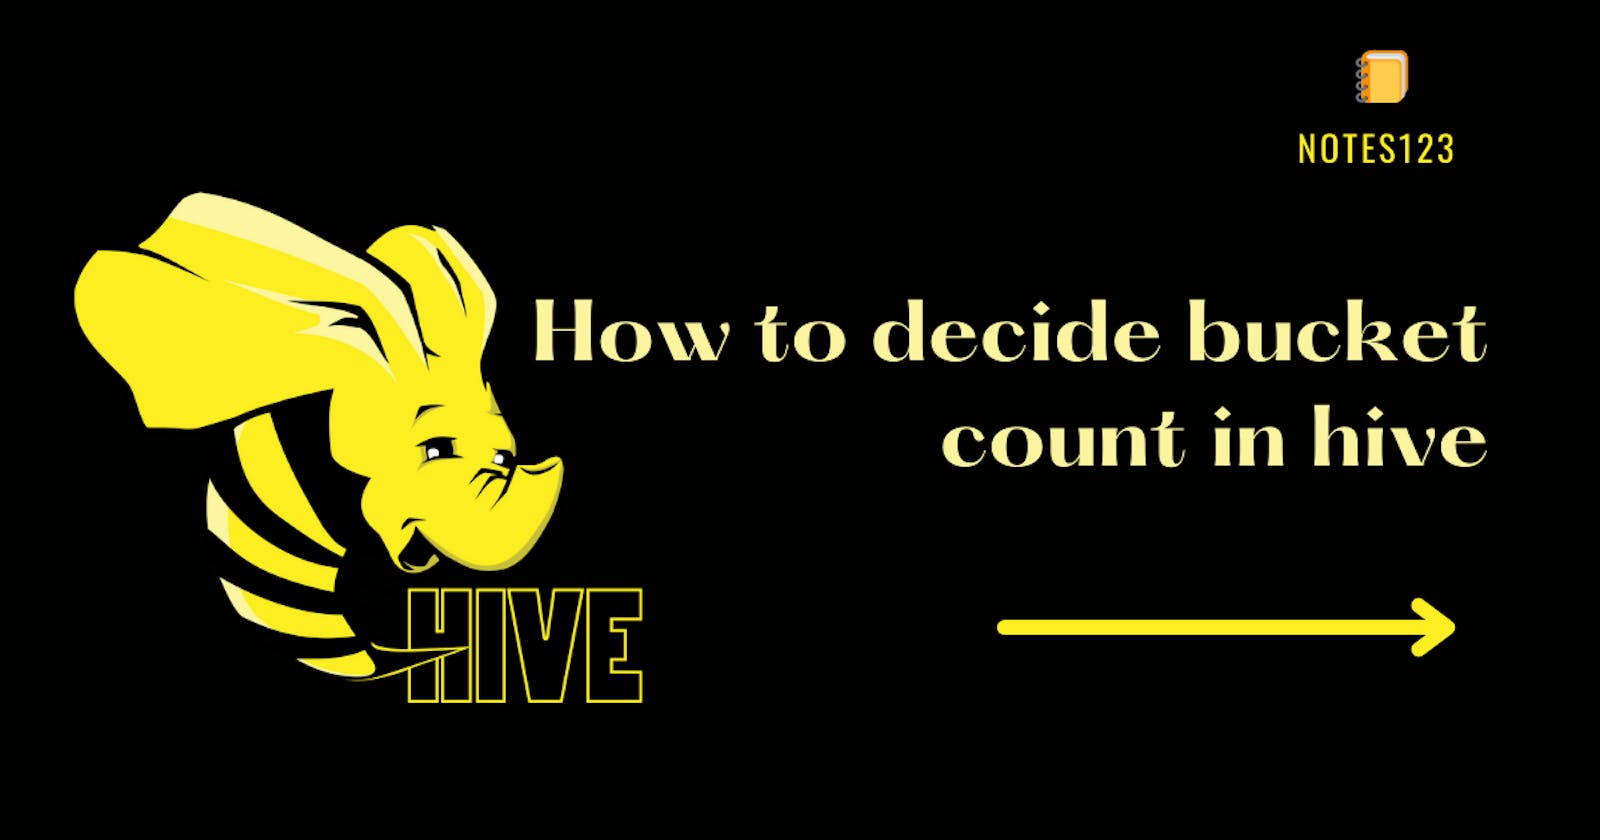 How to decide bucket count in hive